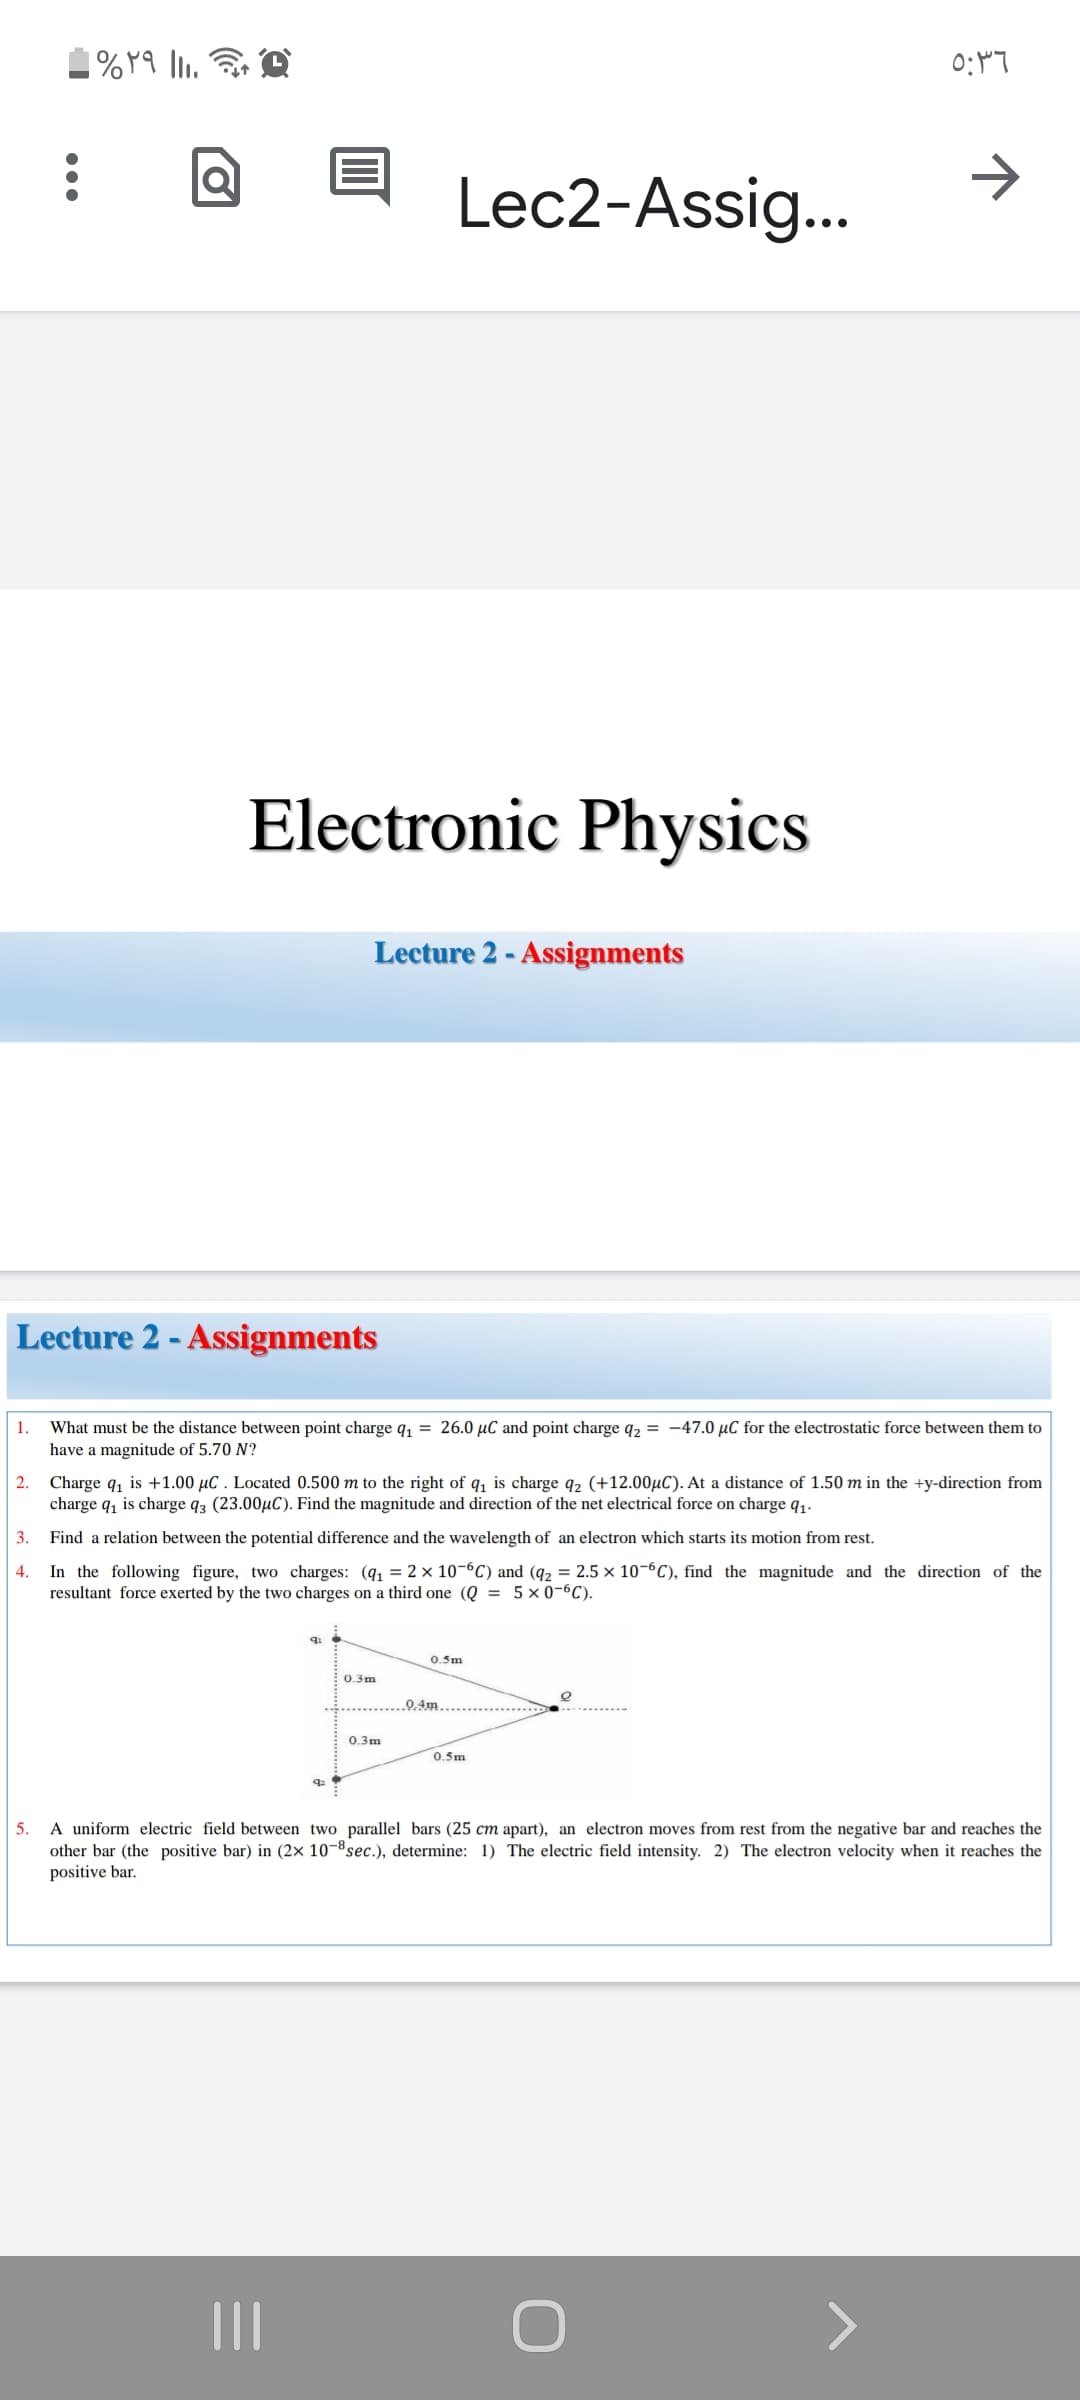 ->
Lec2-Assig...
Electronic Physics
Lecture 2 - Assignments
Lecture 2 - Assignments
1.
What must be the distance between point charge q, = 26.0 µC and point charge q2 = -47.0 µC for the electrostatic force between them to
have a magnitude of 5.70 N?
2. Charge q, is +1.00 µC . Located 0.500 m to the right of q, is charge q2 (+12.00µC). At a distance of 1.50 m in the +y-direction from
charge q, is charge q3 (23.00µC). Find the magnitude and direction of the net electrical force on charge q1.
3.
Find a relation between the potential difference and the wavelength of an electron which starts its motion from rest.
In the following figure, two charges: (q, = 2 × 10-6C) and (q2 = 2.5 x 10-6C), find the magnitude and the direction of the
resultant force exerted by the two charges on a third one (Q = 5 × 0-6C).
4.
0.5m
0.3m
.0.4m..
0.3m
0.5m
A uniform electric field between two parallel bars (25 cm apart), an electron moves from rest from the negative bar and reaches the
other bar (the positive bar) in (2× 10-8sec.), determine: 1) The electric field intensity. 2) The electron velocity when it reaches the
positive bar.
5.
